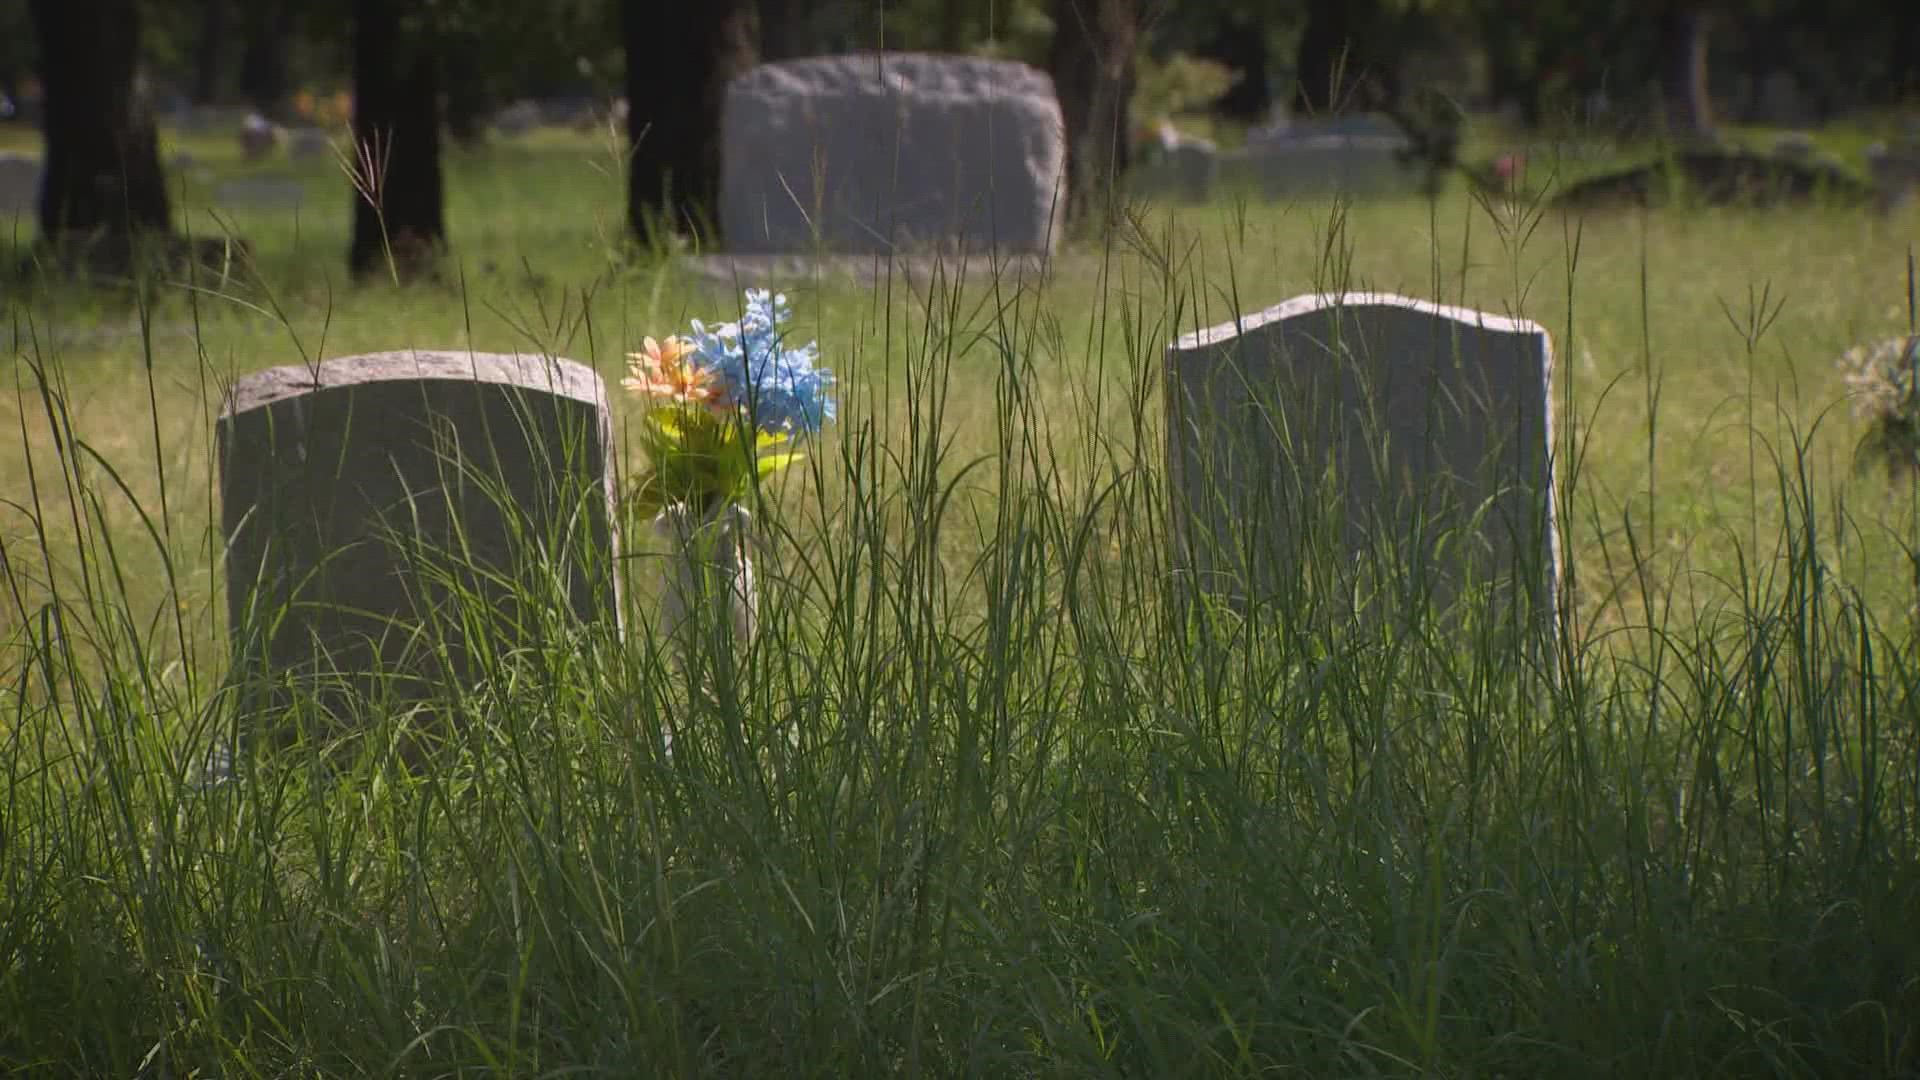 Overgrown grass, damaged headstones and grave markers sinking in the ground are among issues families are complaining about at Lincoln Memorial Cemetery.